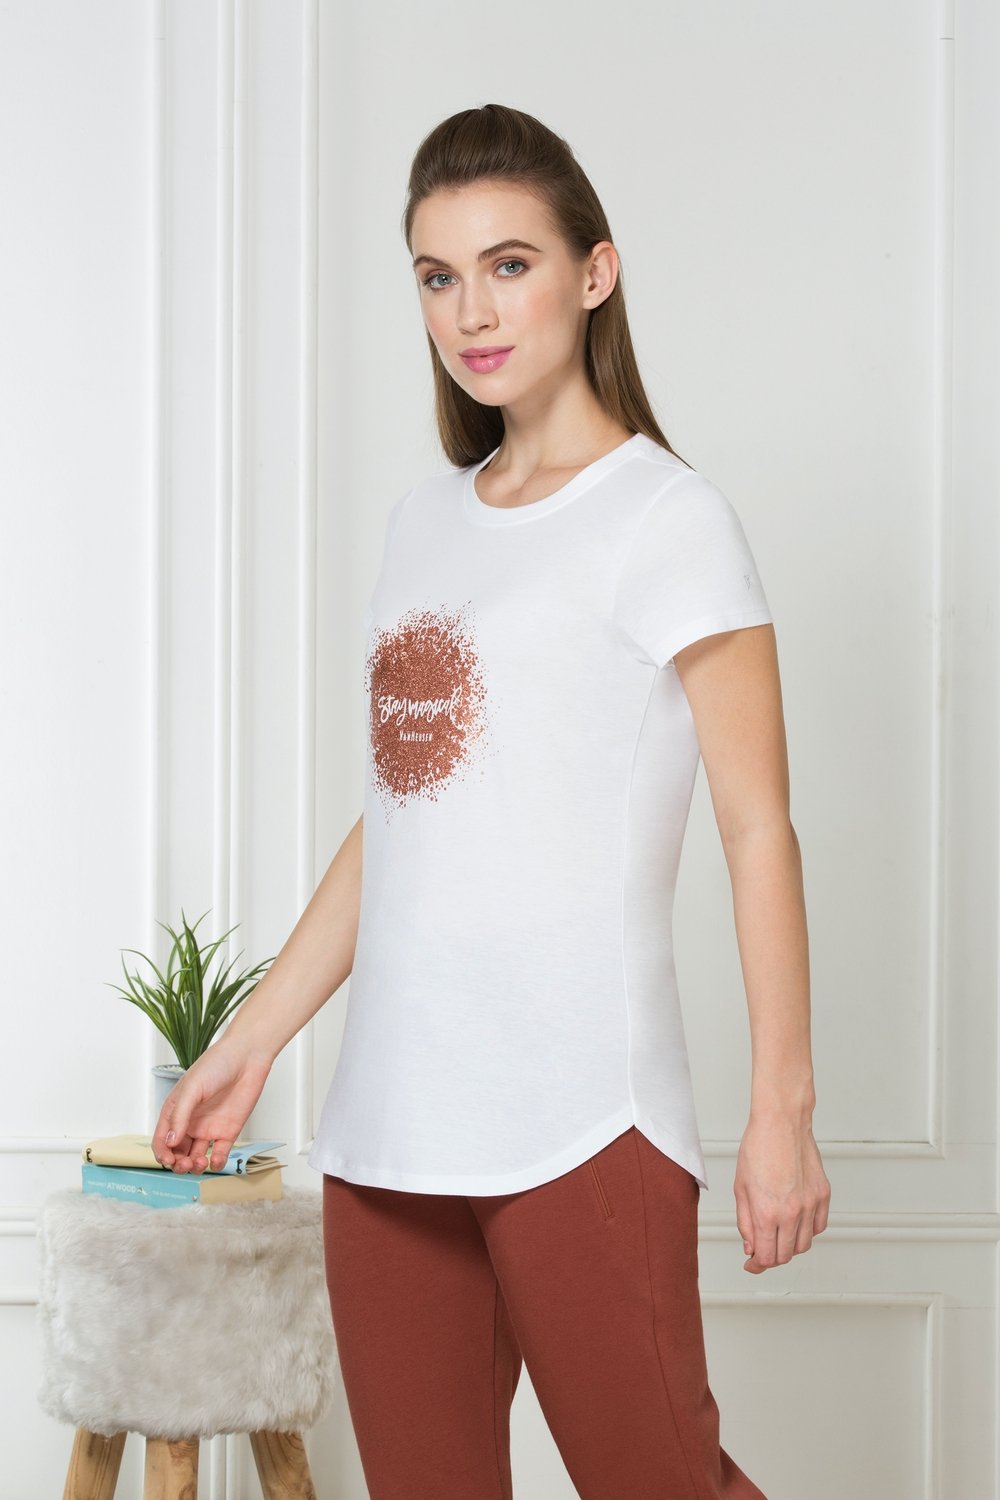 stylish Printed Cotton Every day Wear t-shirt tops for Women - Stilento